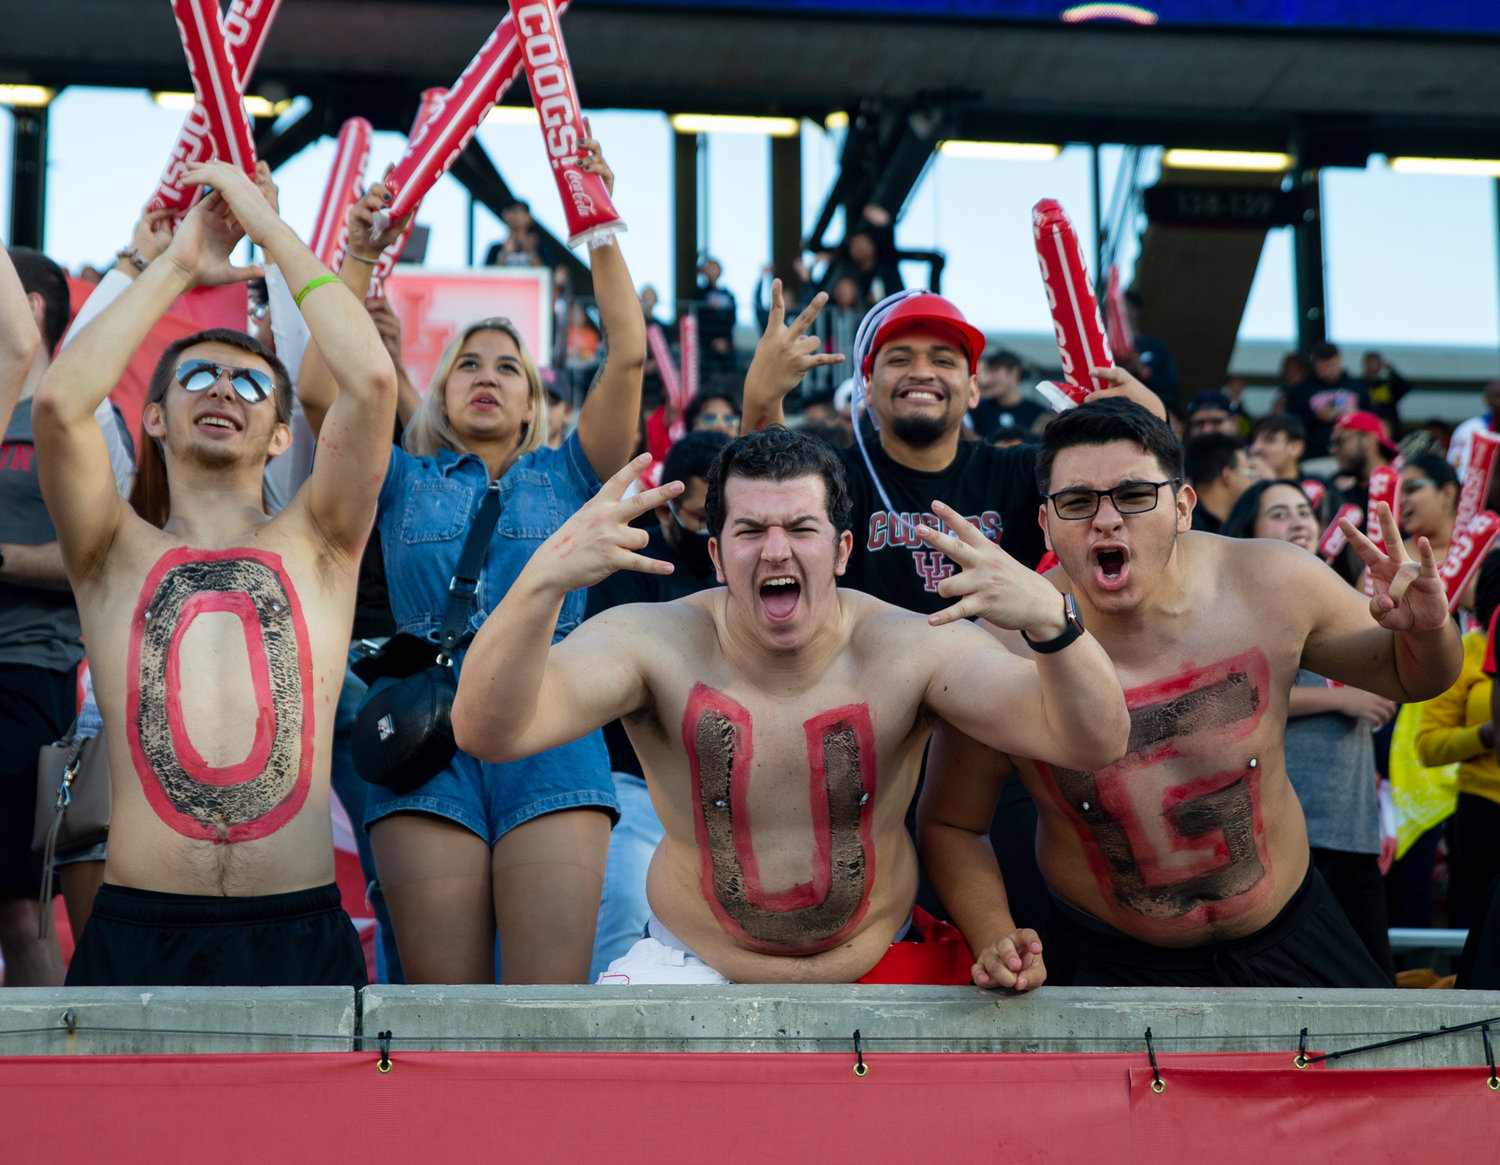 Houston Cougars students cheer during an NCAA football game between Houston and SMU on October 30, 2021 in Houston, Texas.